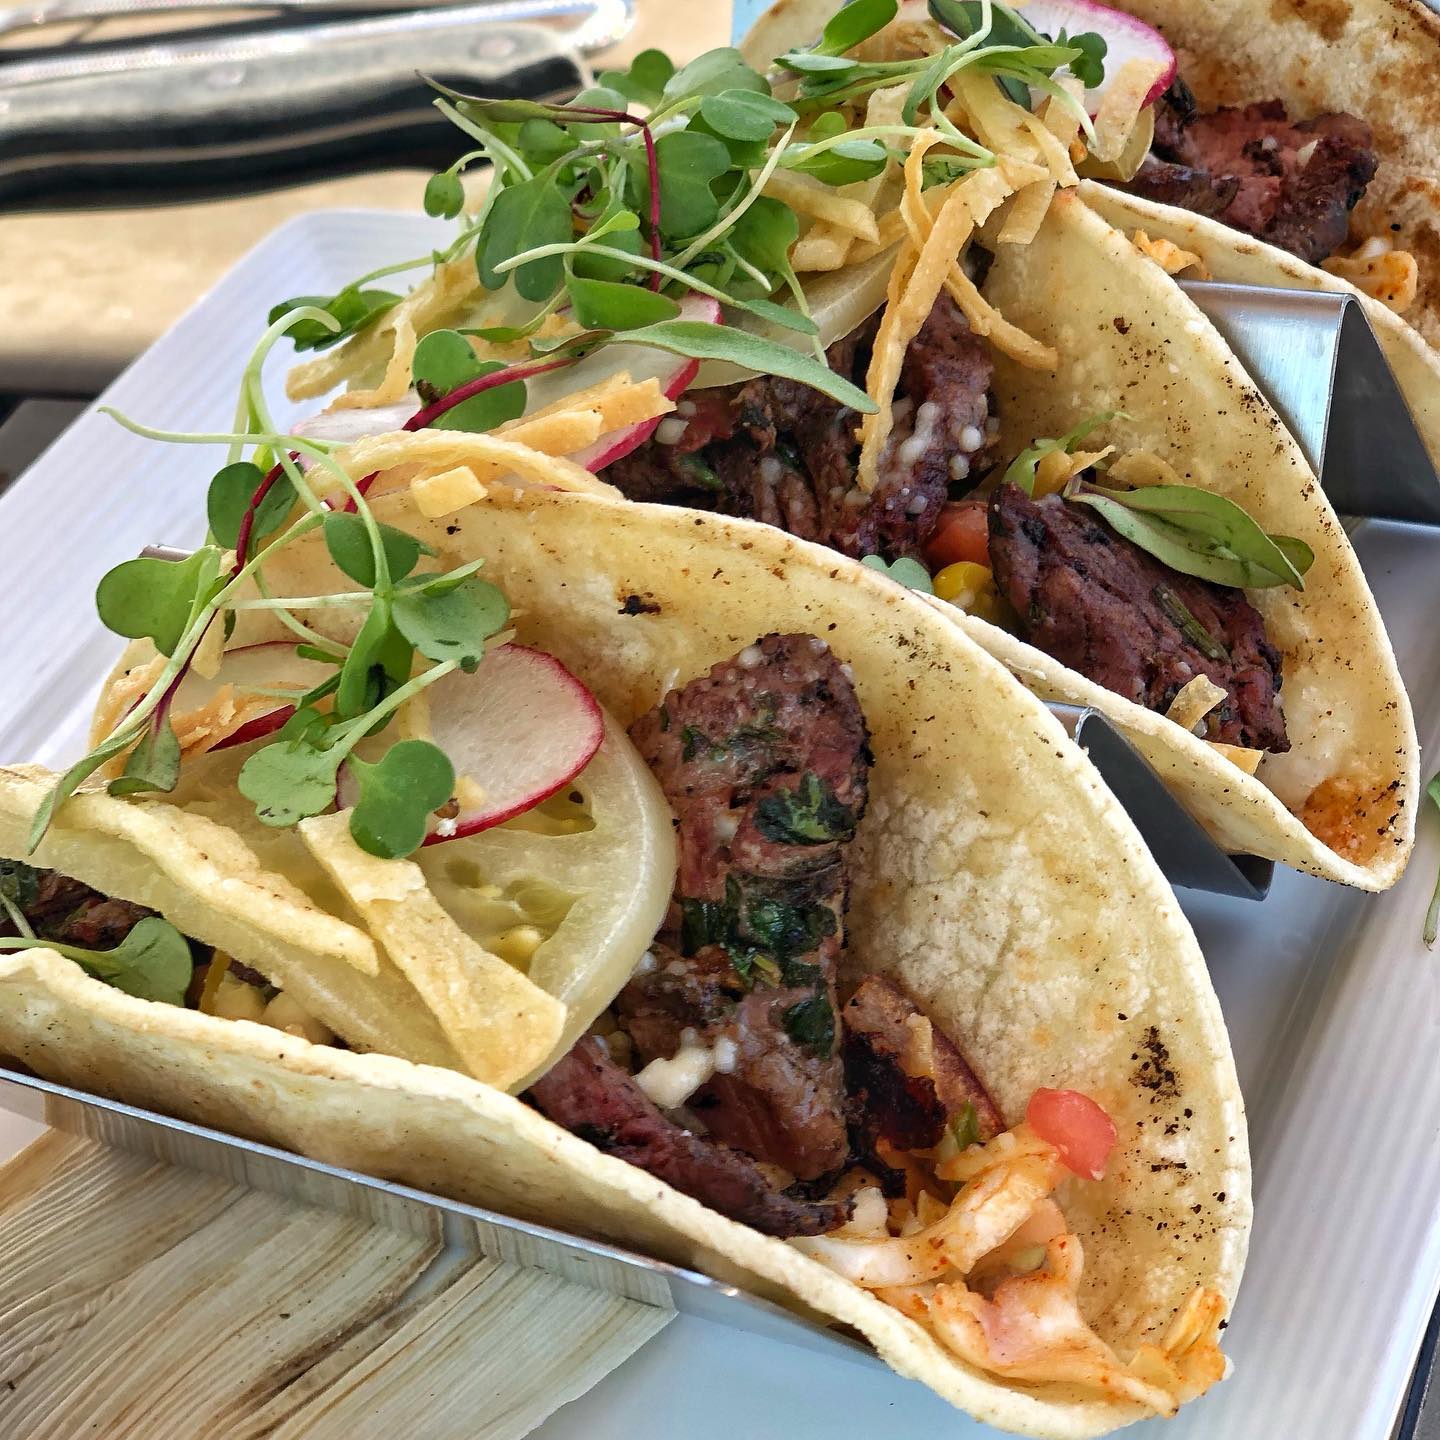 Did someone mention Tuesdays are for tacos? 🌮 #tacotuesday